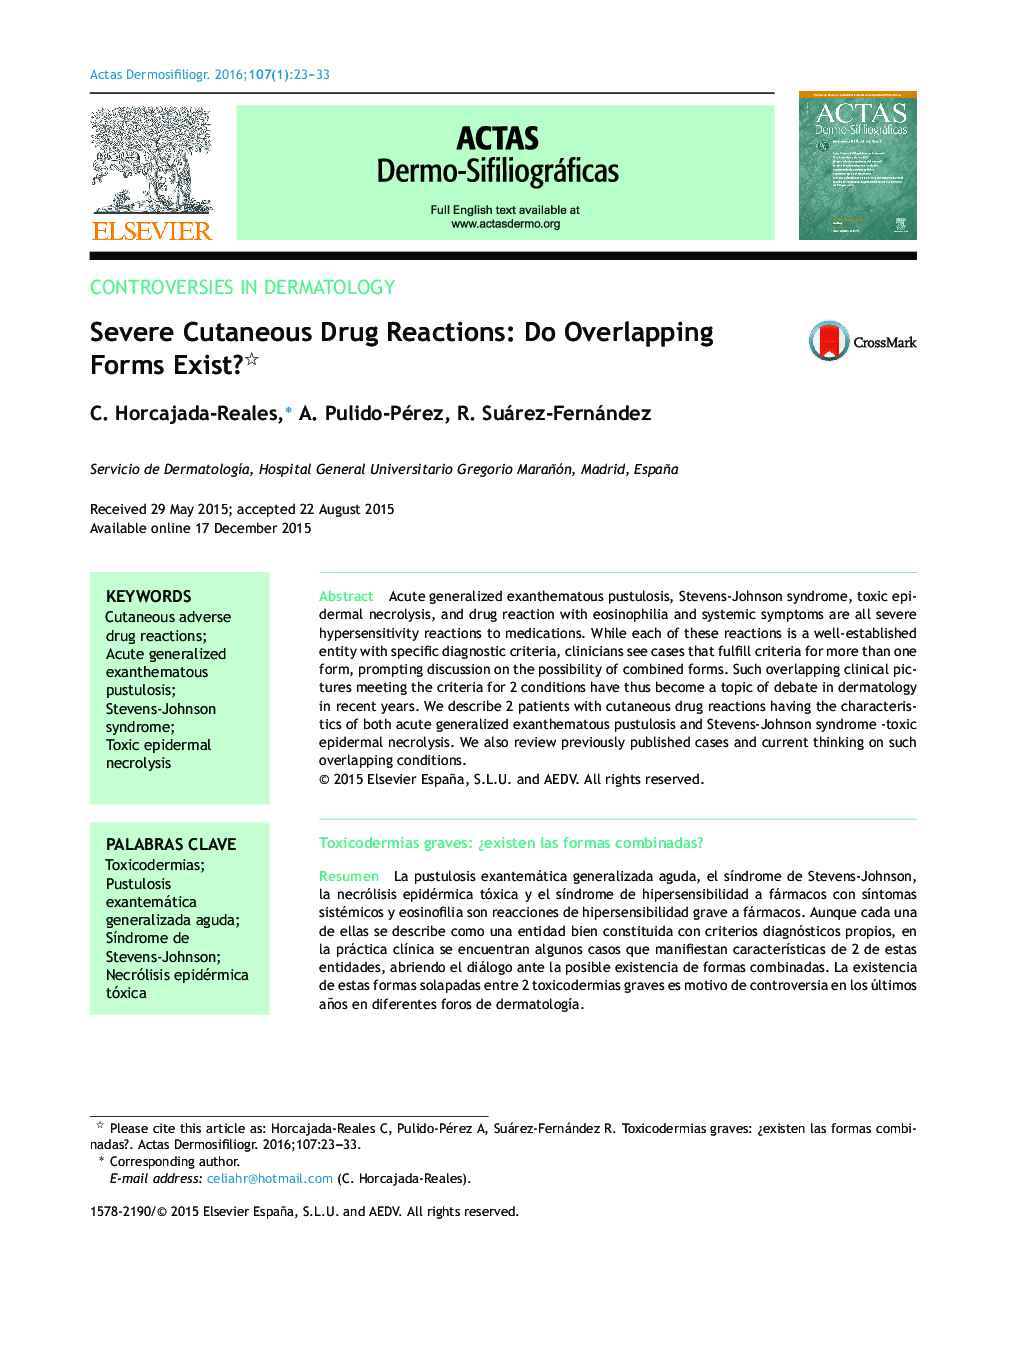 Severe Cutaneous Drug Reactions: Do Overlapping Forms Exist? 